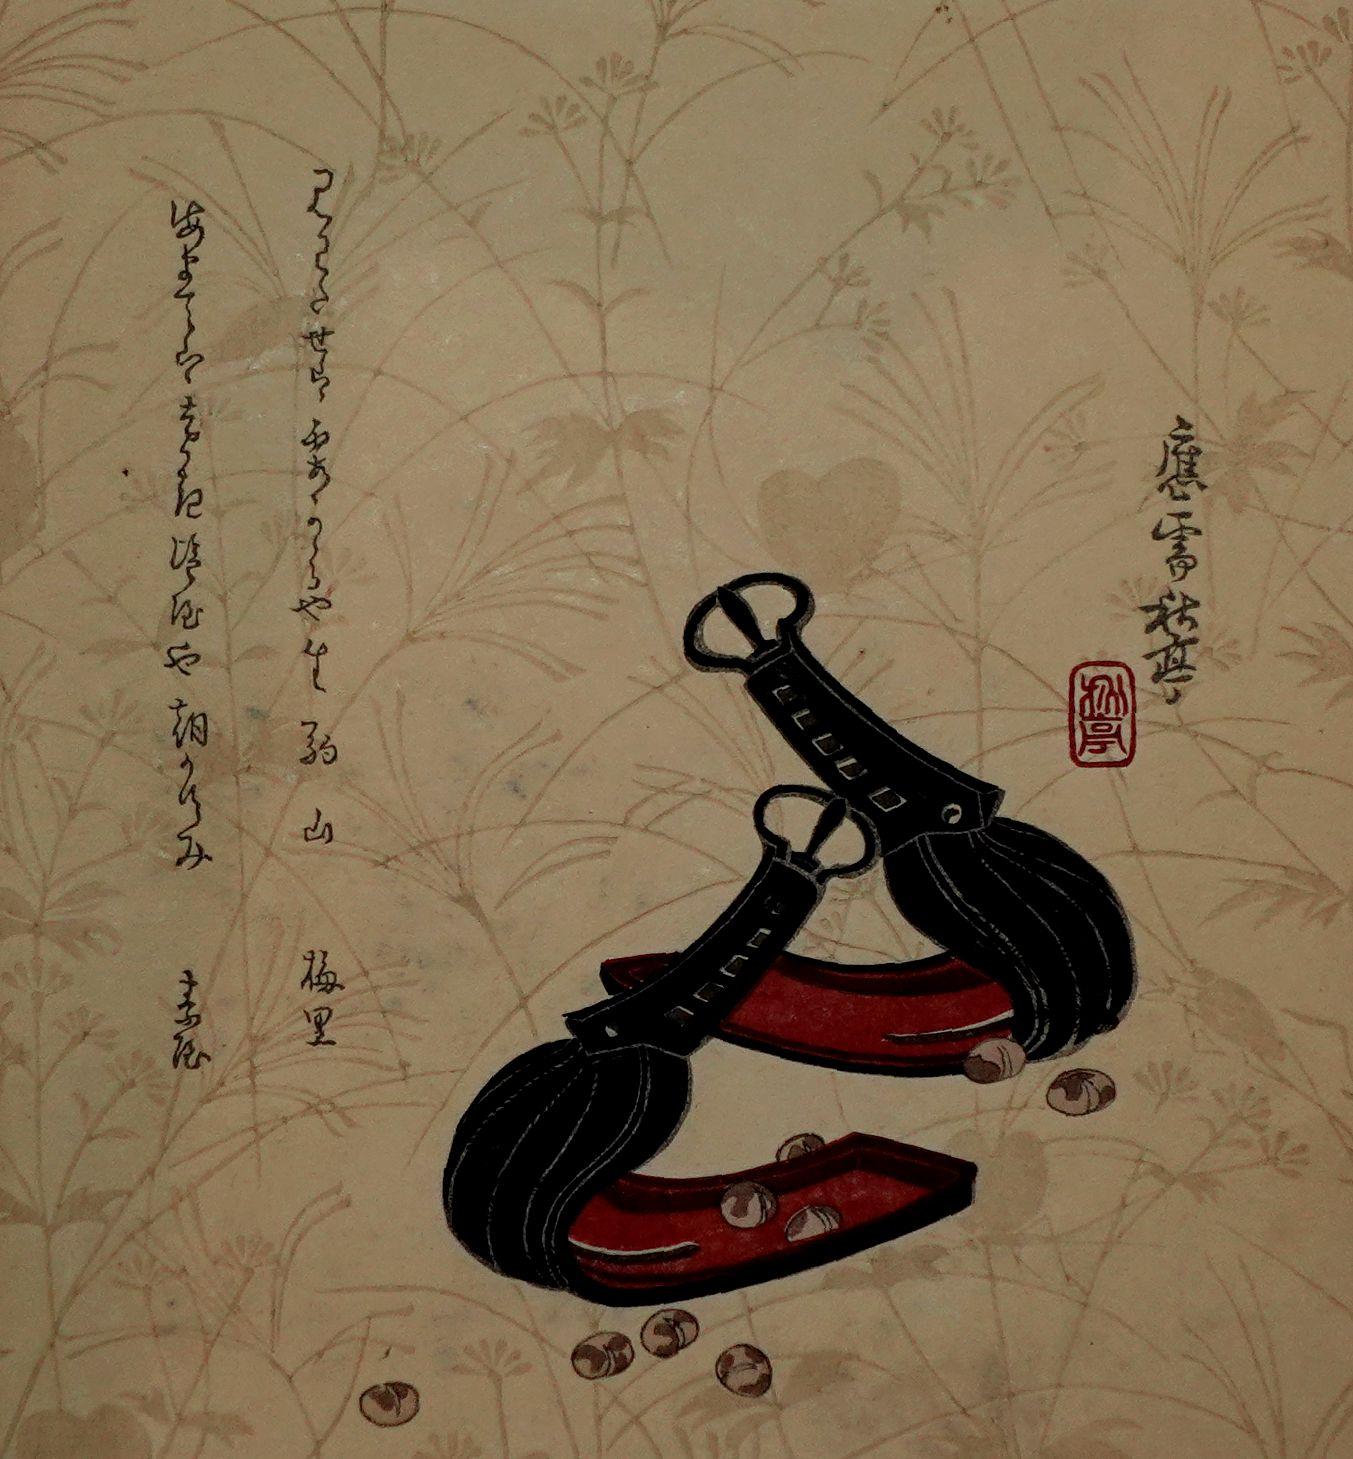 The painting presents a very old and traditional Japanese belt with hidden space to store small things such as pills, rings, and jewelry. 

Tanaka Shutei(1810 ~ 1858)
Tanka was a very important woodblock print artist in Japanese history. He had a